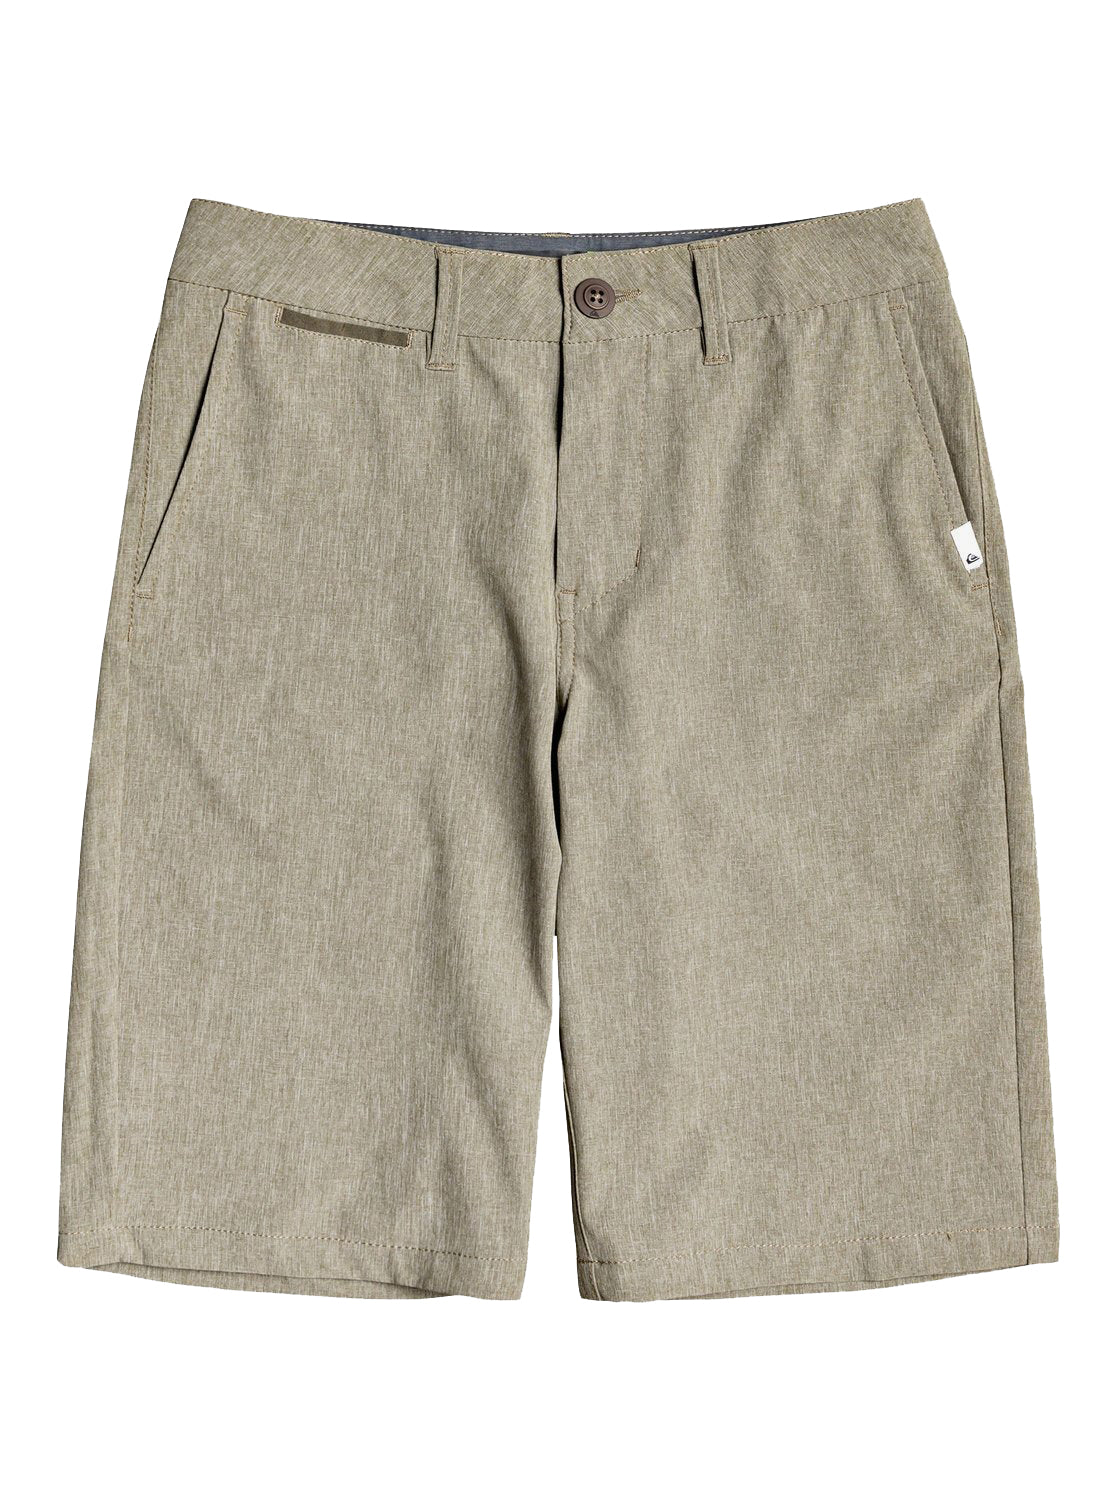 Quiksilver Union Heather 19in Youth Amphibian Shorts GZH0 23/10S